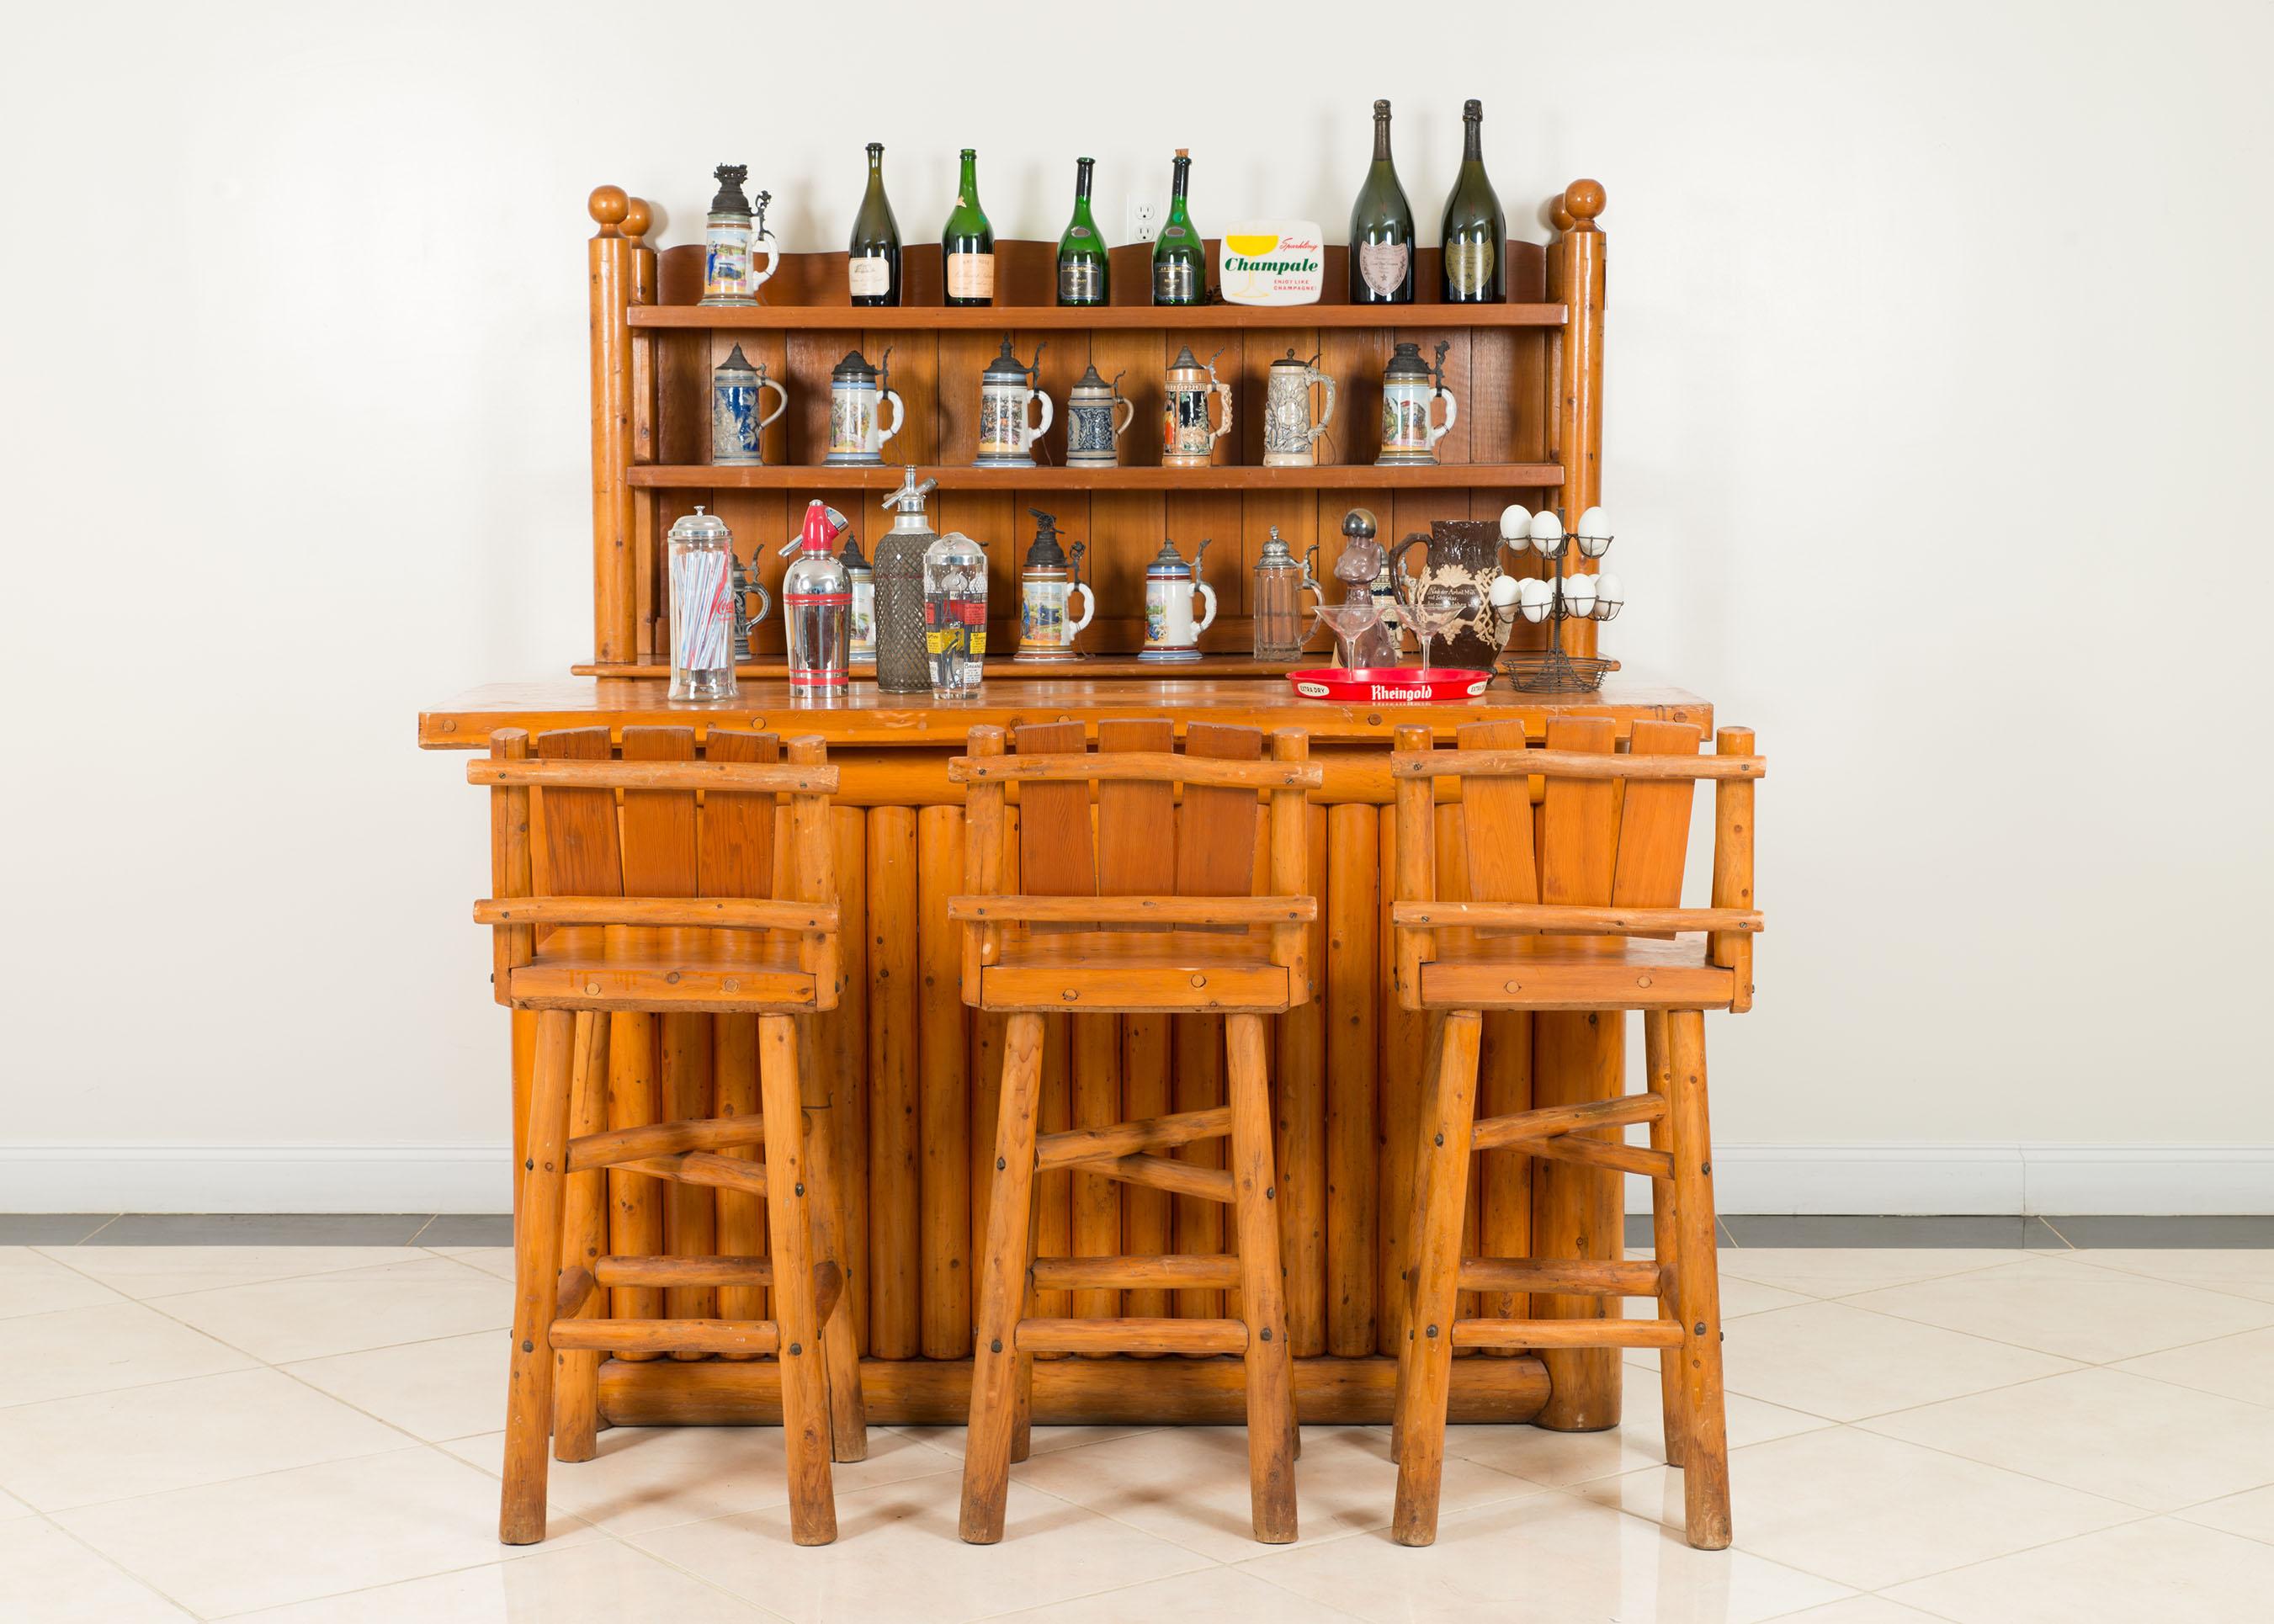 Set of American Old Hickory style (1950s) cedar bar furniture including a 2 section back bar cabinet, 4 bar stools, & a bar with a fluted front design (by RITTENHOUSE) (Available individually: bar: 060874, back bar: 060875, 4 stools: 060876)
